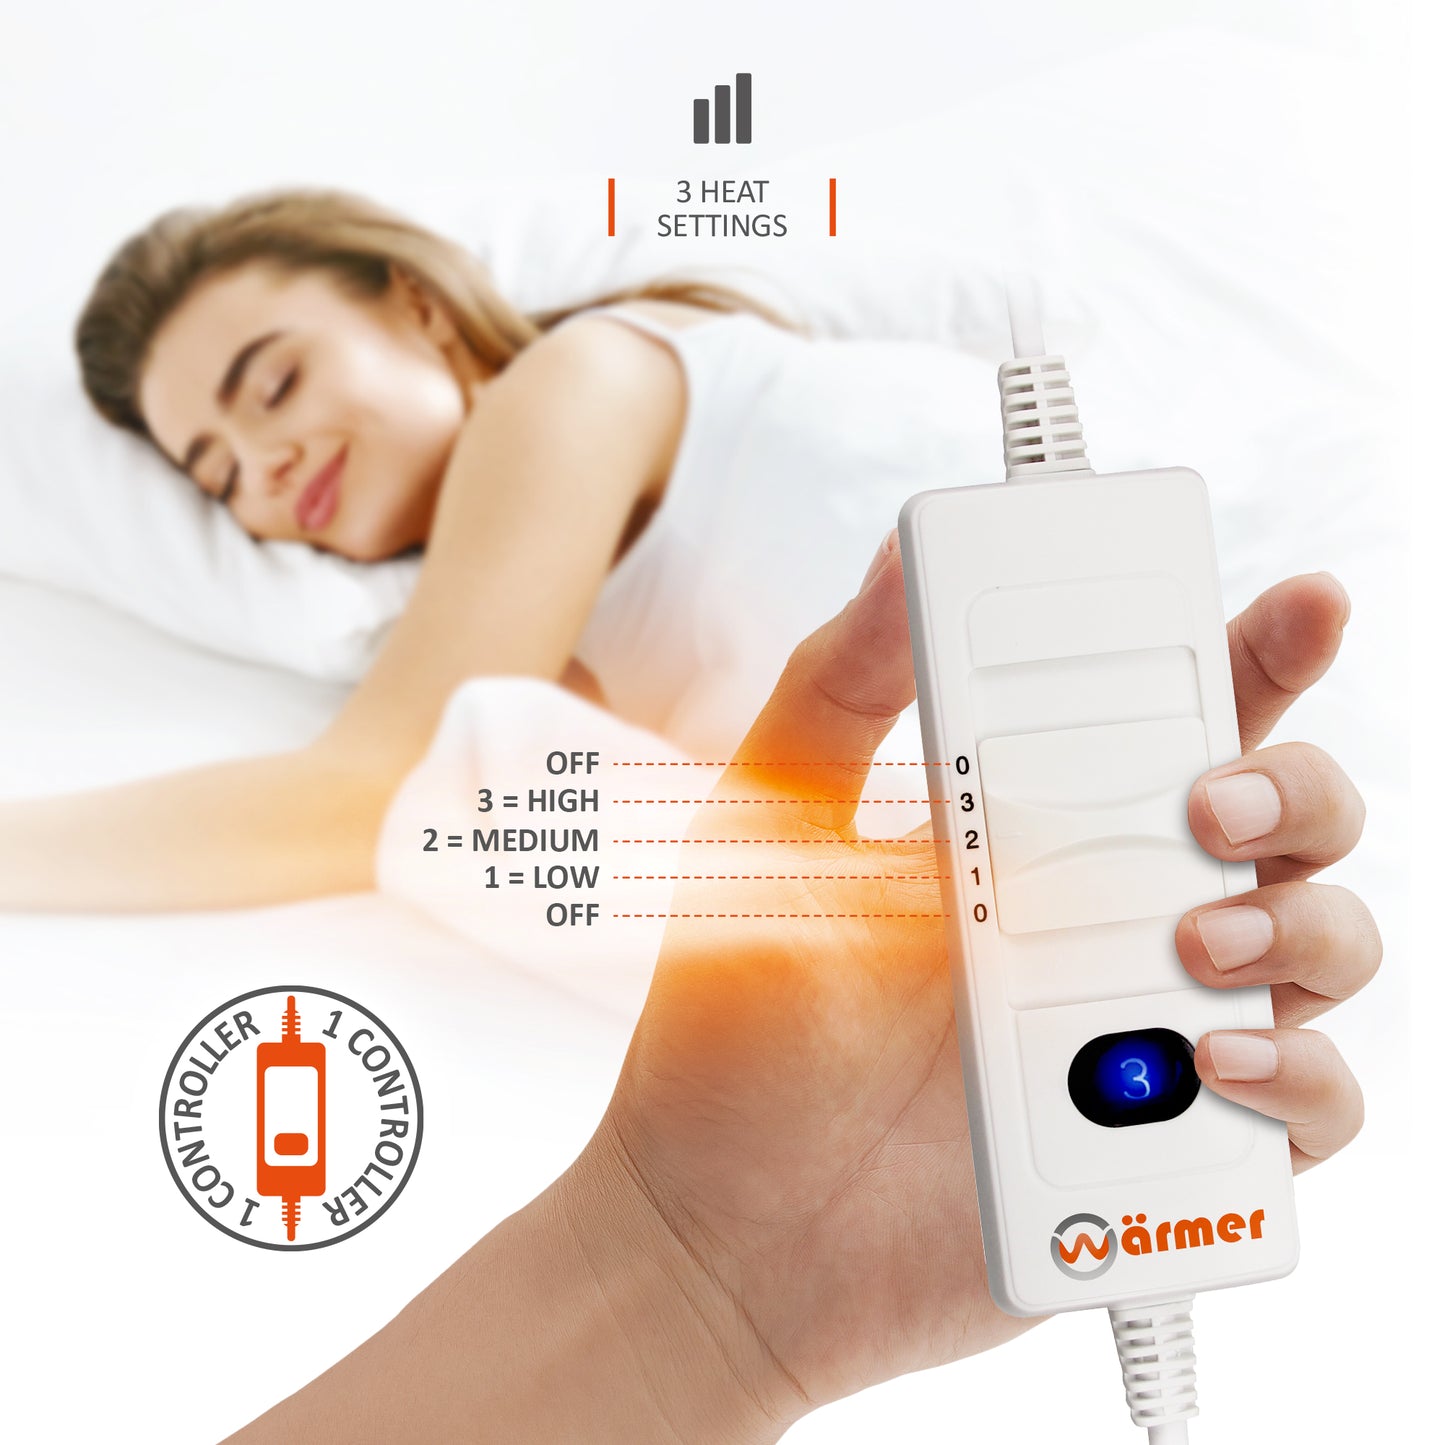 Wärmer Fully Fitted Electric Blanket